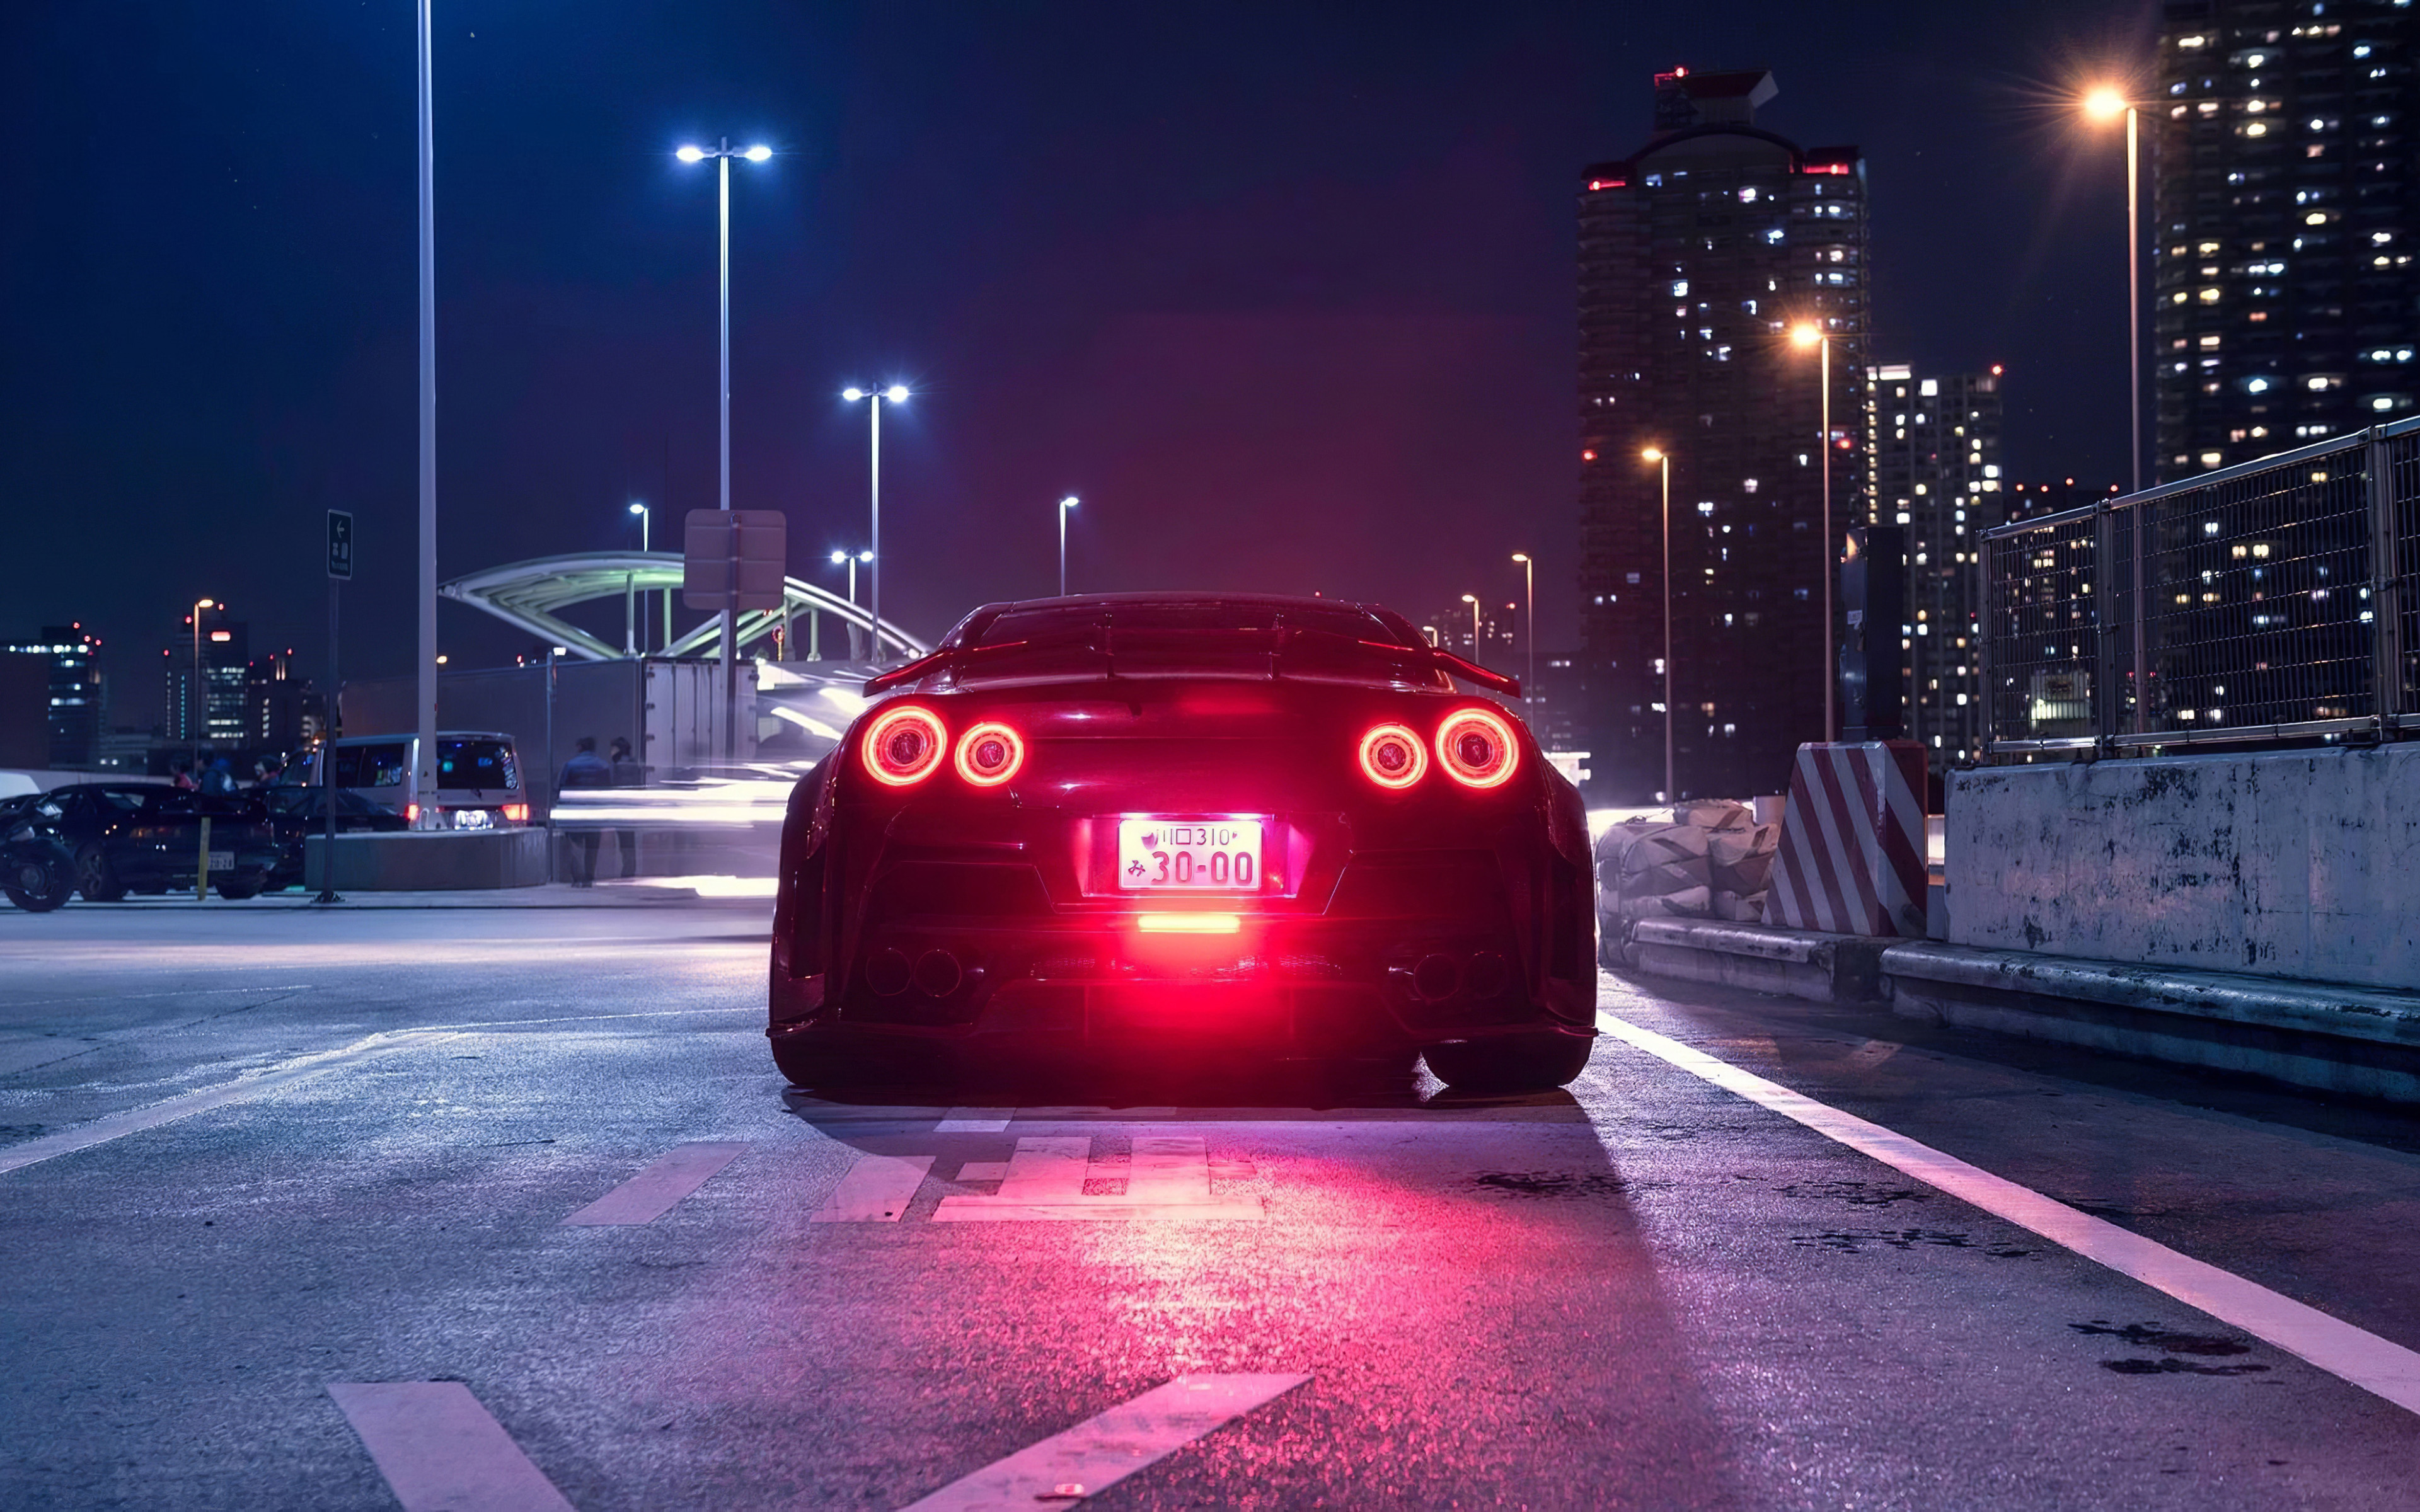 Download Wallpaper Nissan GT R, 4k, Back View, Tuning, 2021 Cars, R Supercars, Nightscapes, Nissan GTR, Japanese Cars, Nissan For Desktop With Resolution 3840x2400. High Quality HD Picture Wallpaper